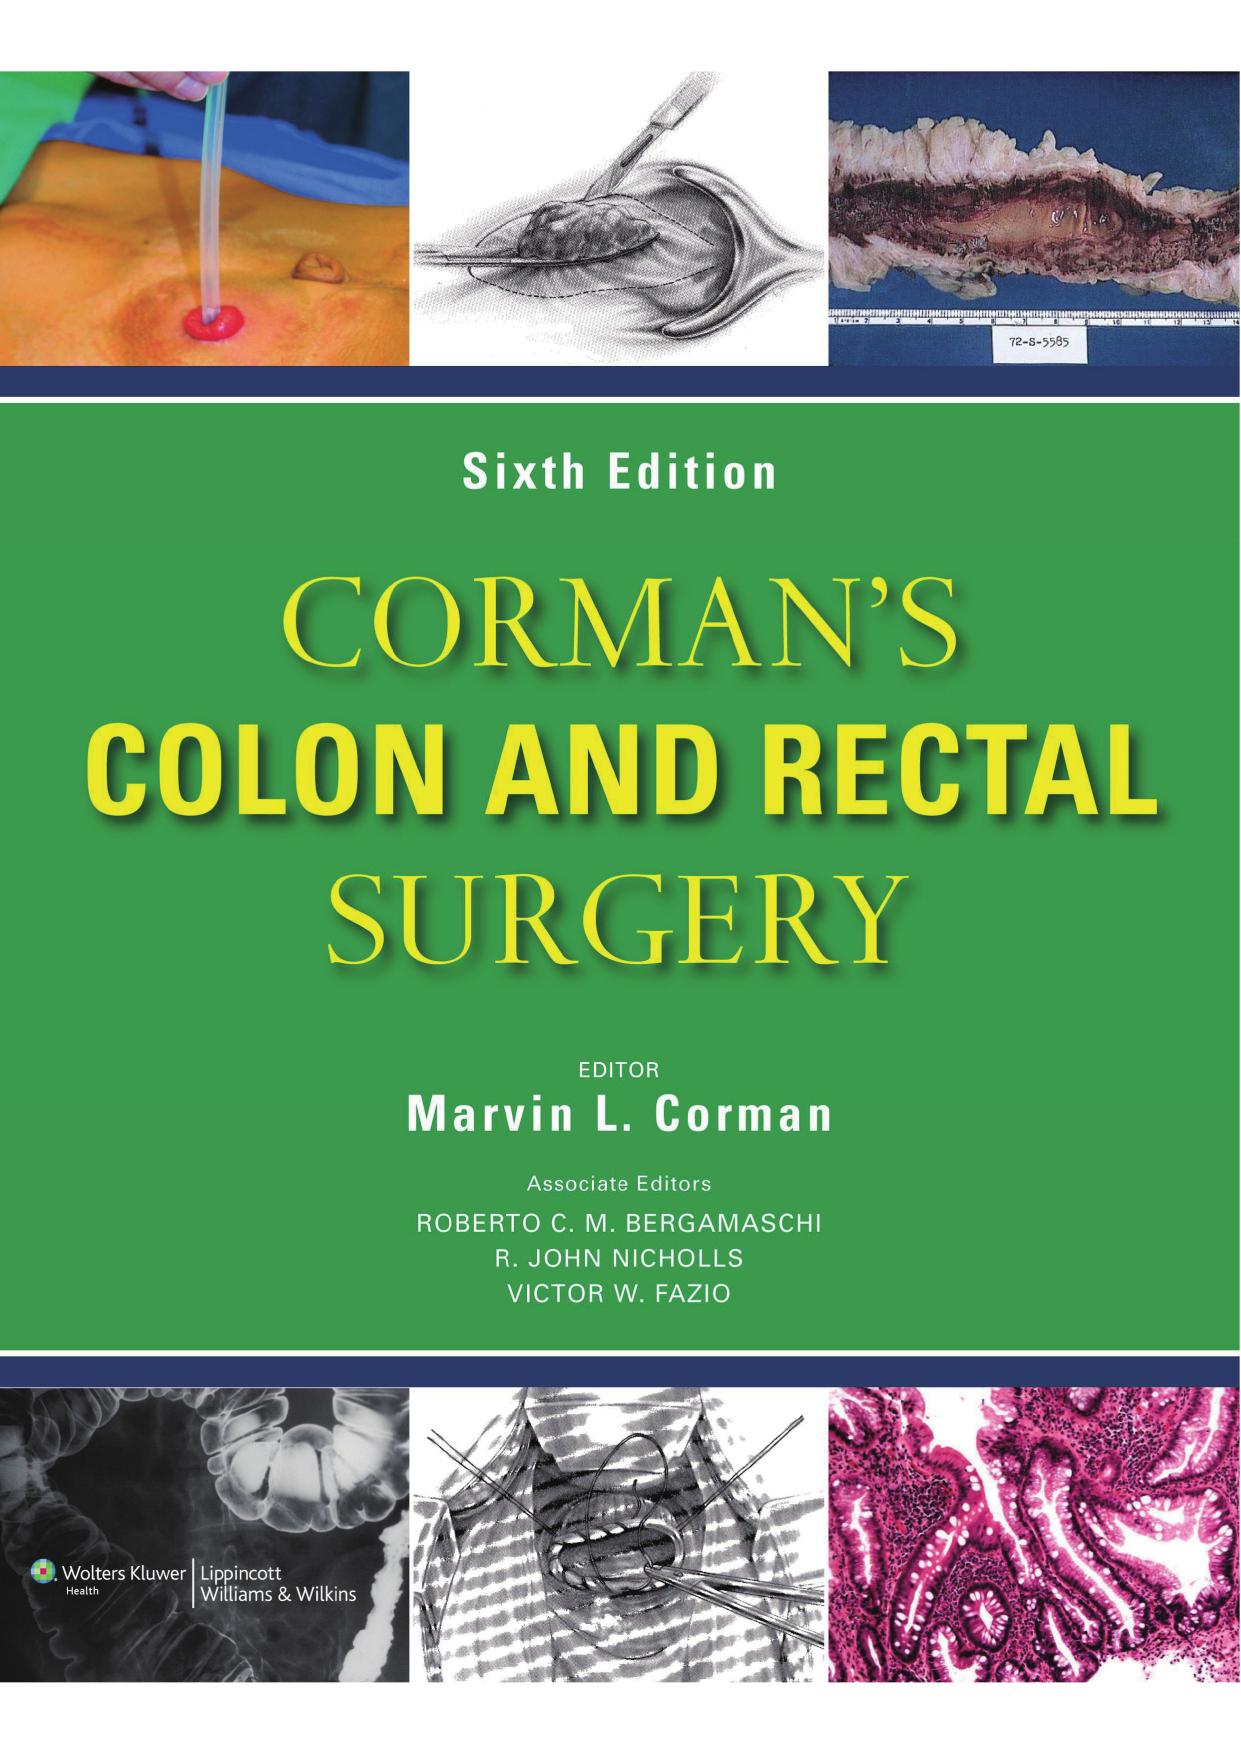 Corman's Colon and Rectal Surgery,6th Edition.jpg